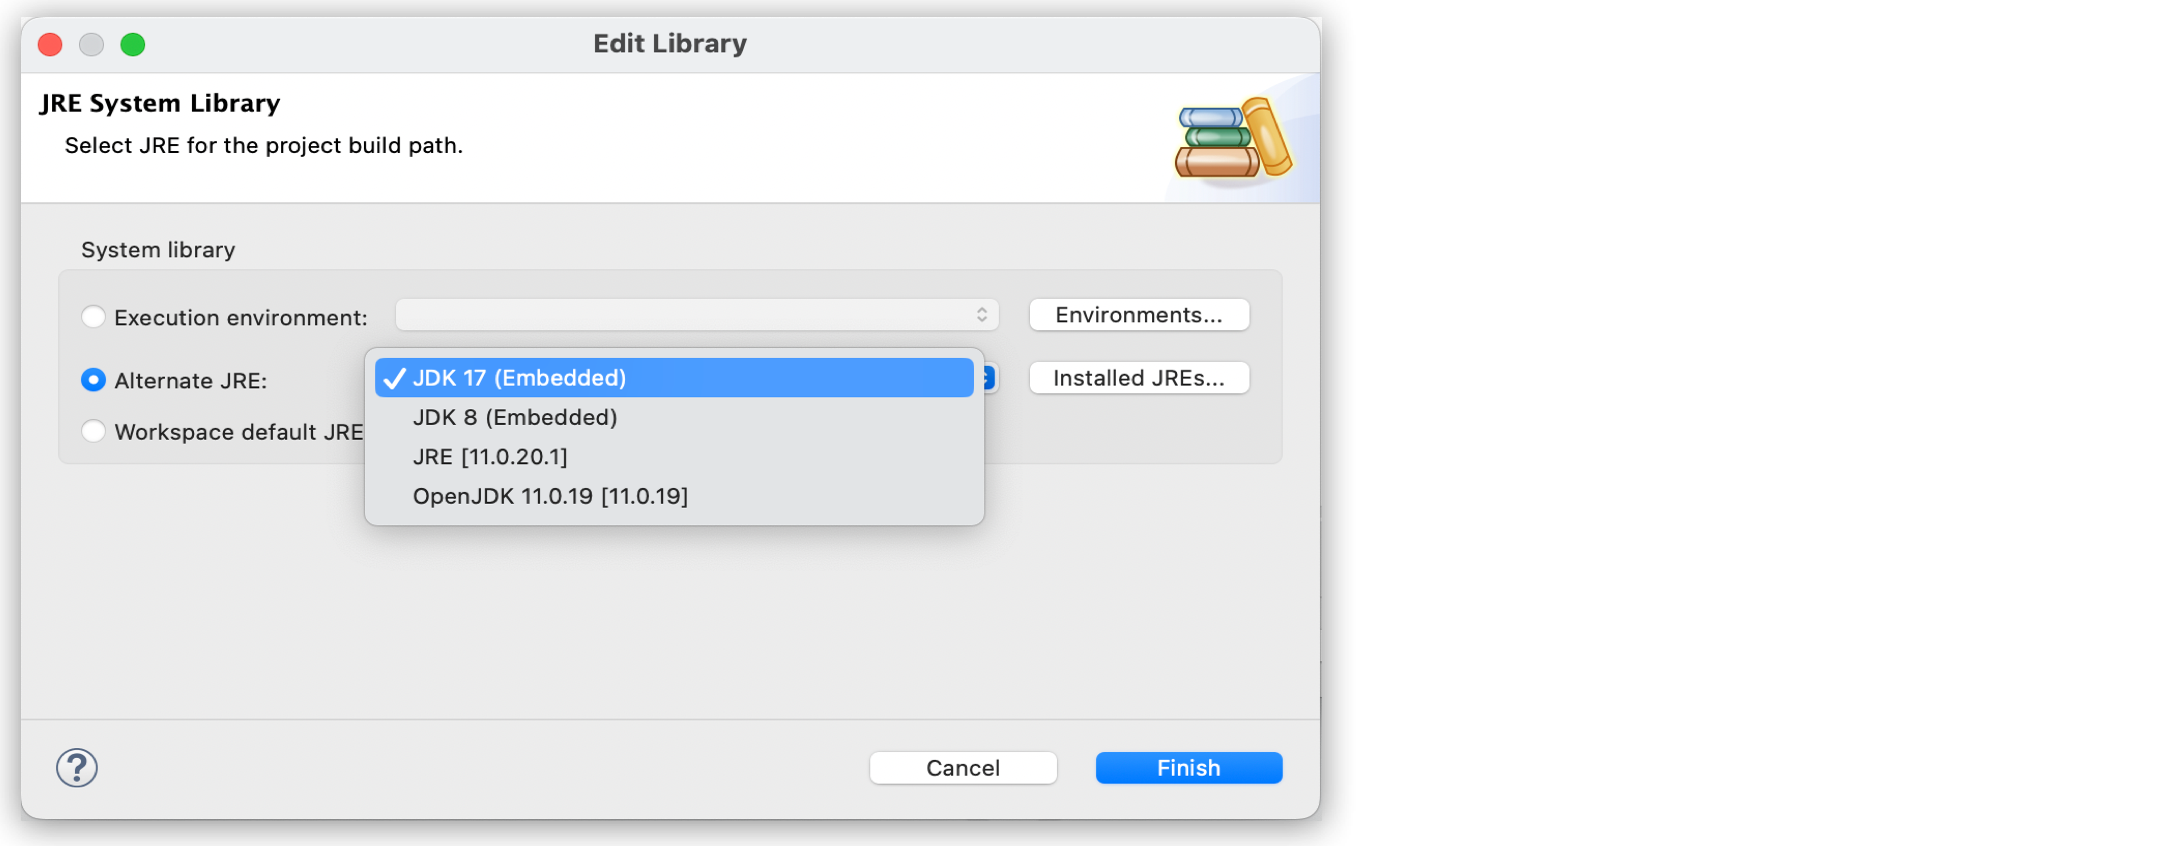 Edit Library window displaying the alternate JRE options.